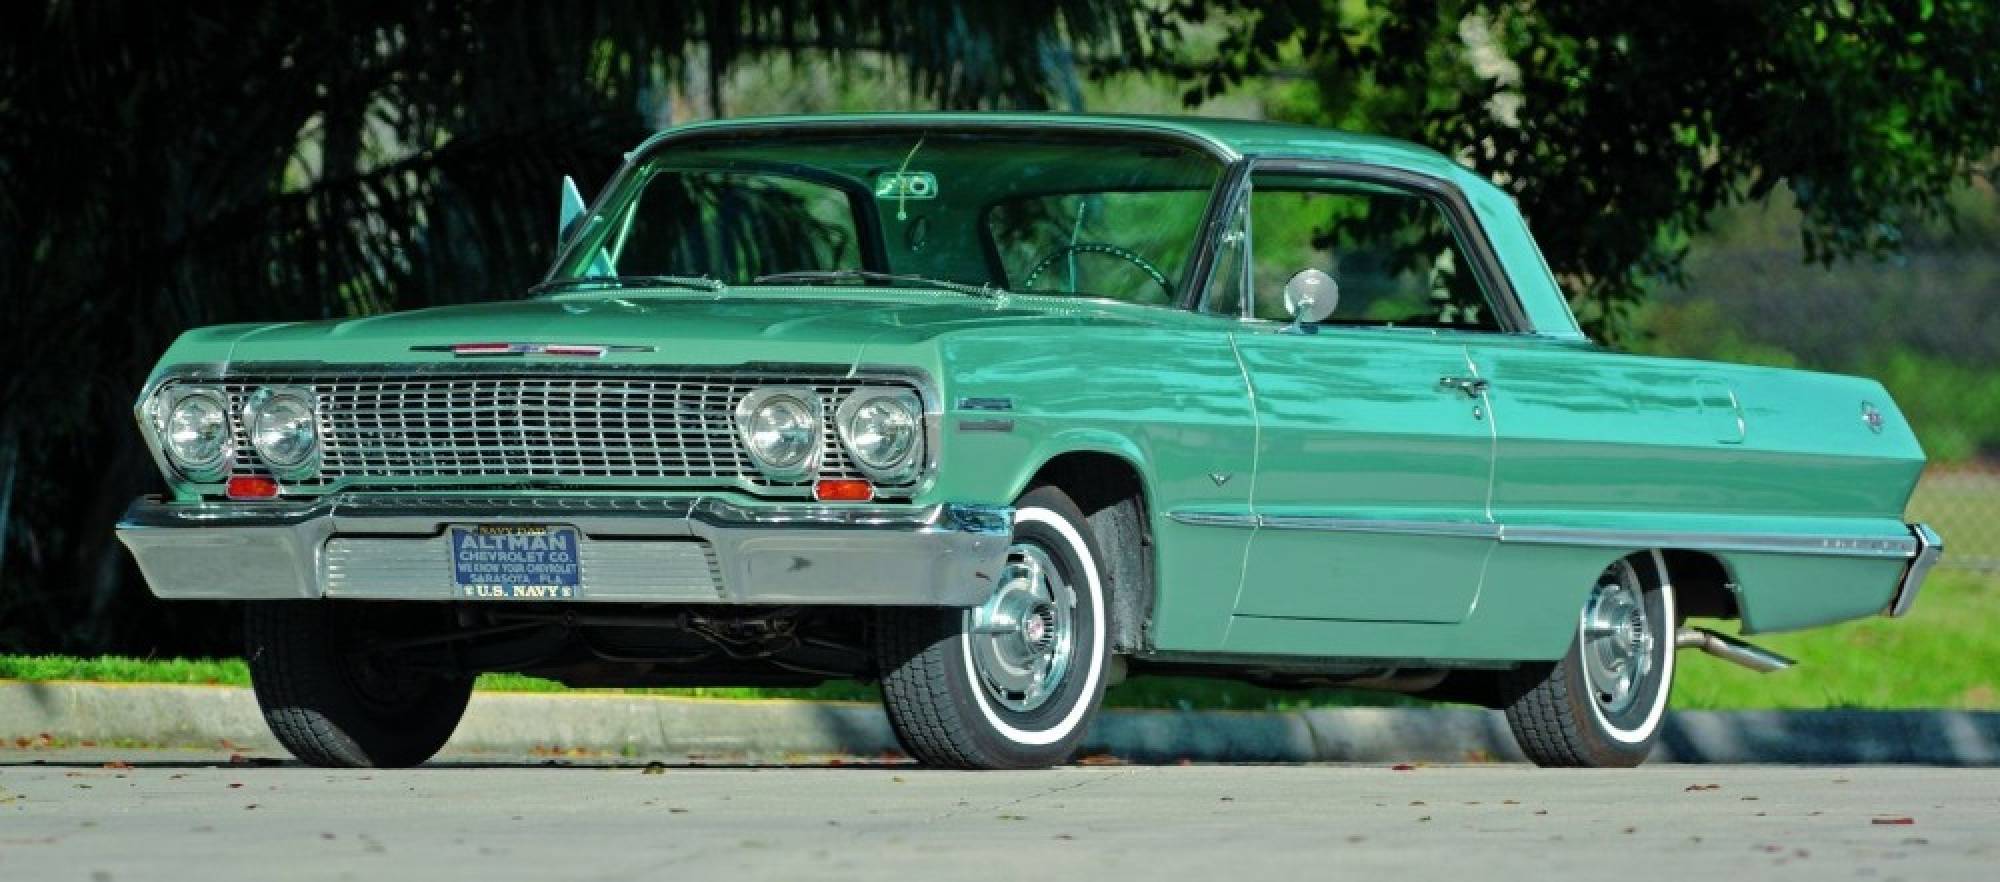 1963 Chevrolet Impala Backgrounds on Wallpapers Vista